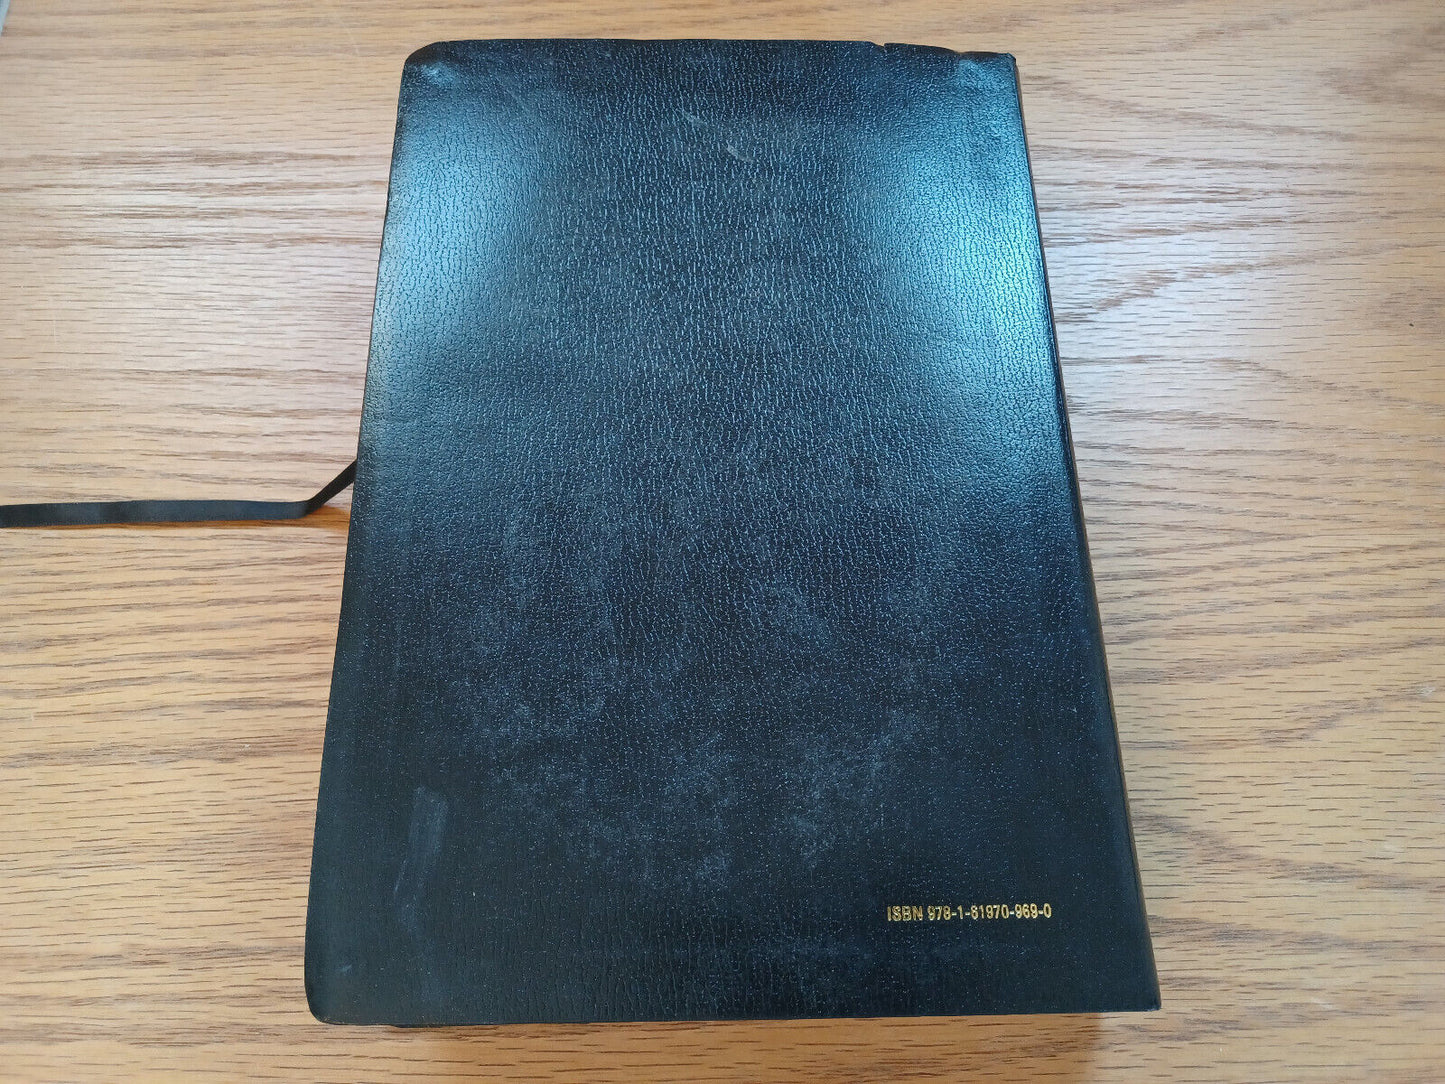 Holy Bible King James Version Super Giant Print Reference 2022